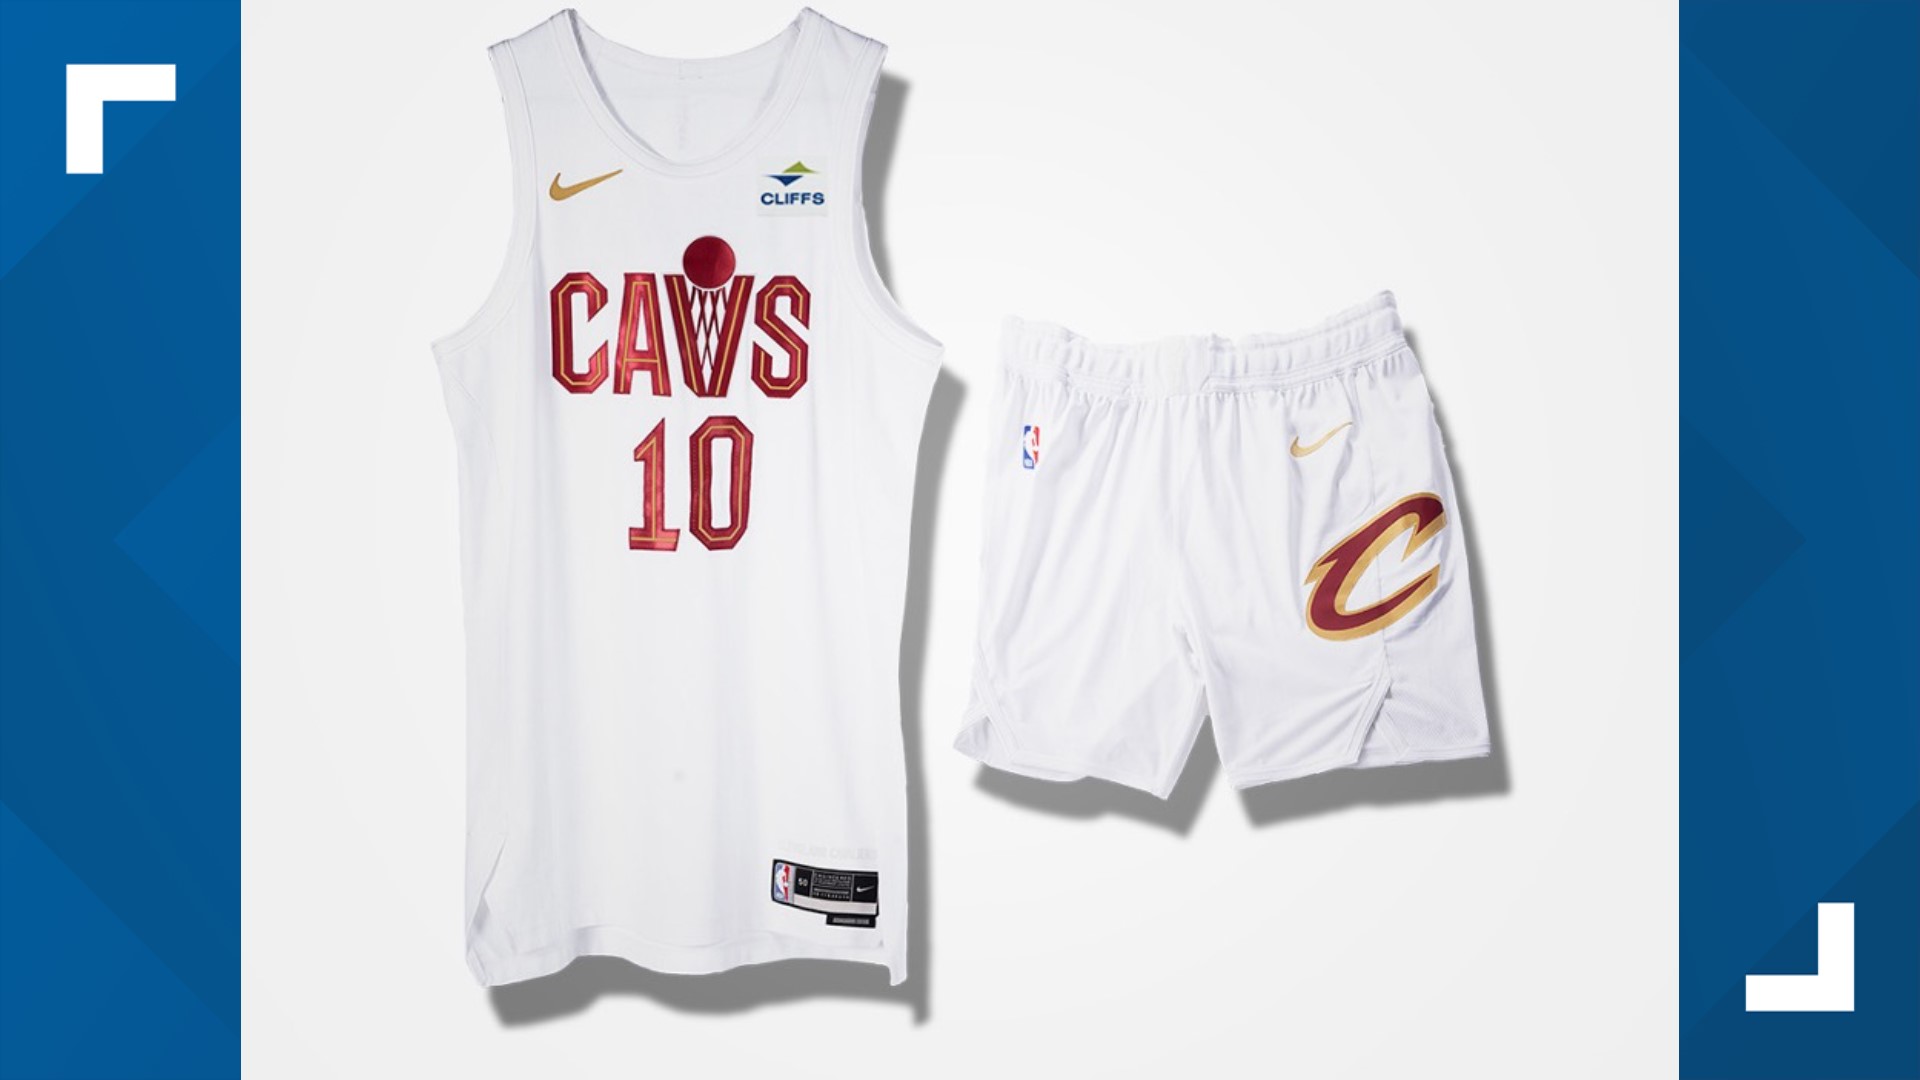 Cleveland Cavaliers unveile new uniforms See them here